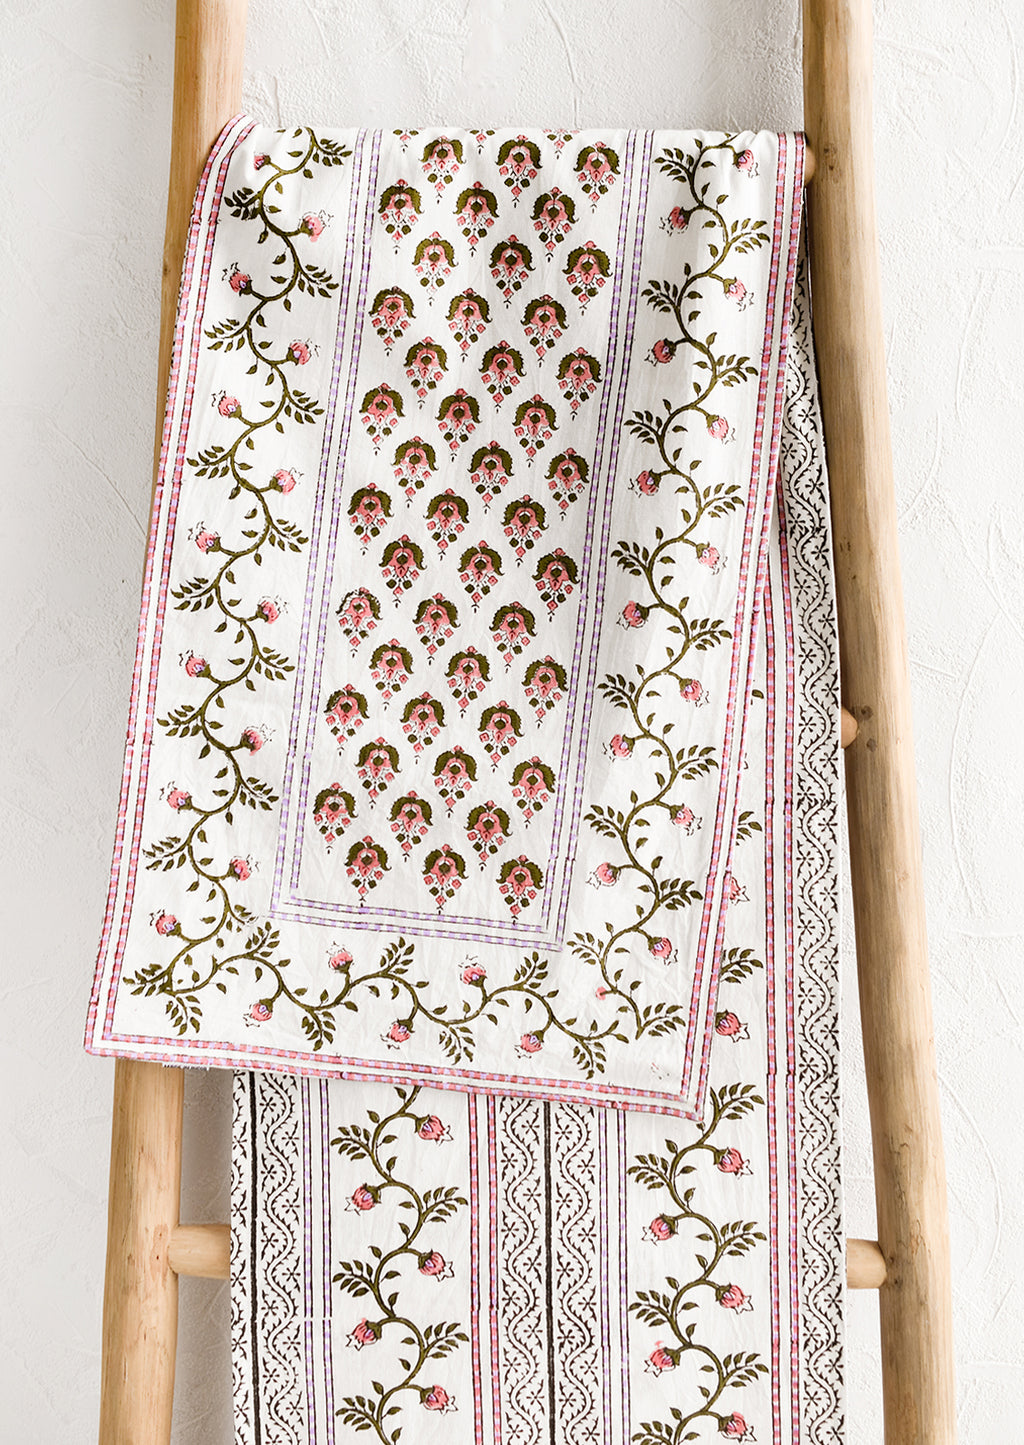 2: A block printed white table runner with pink, green and lavender floral print.